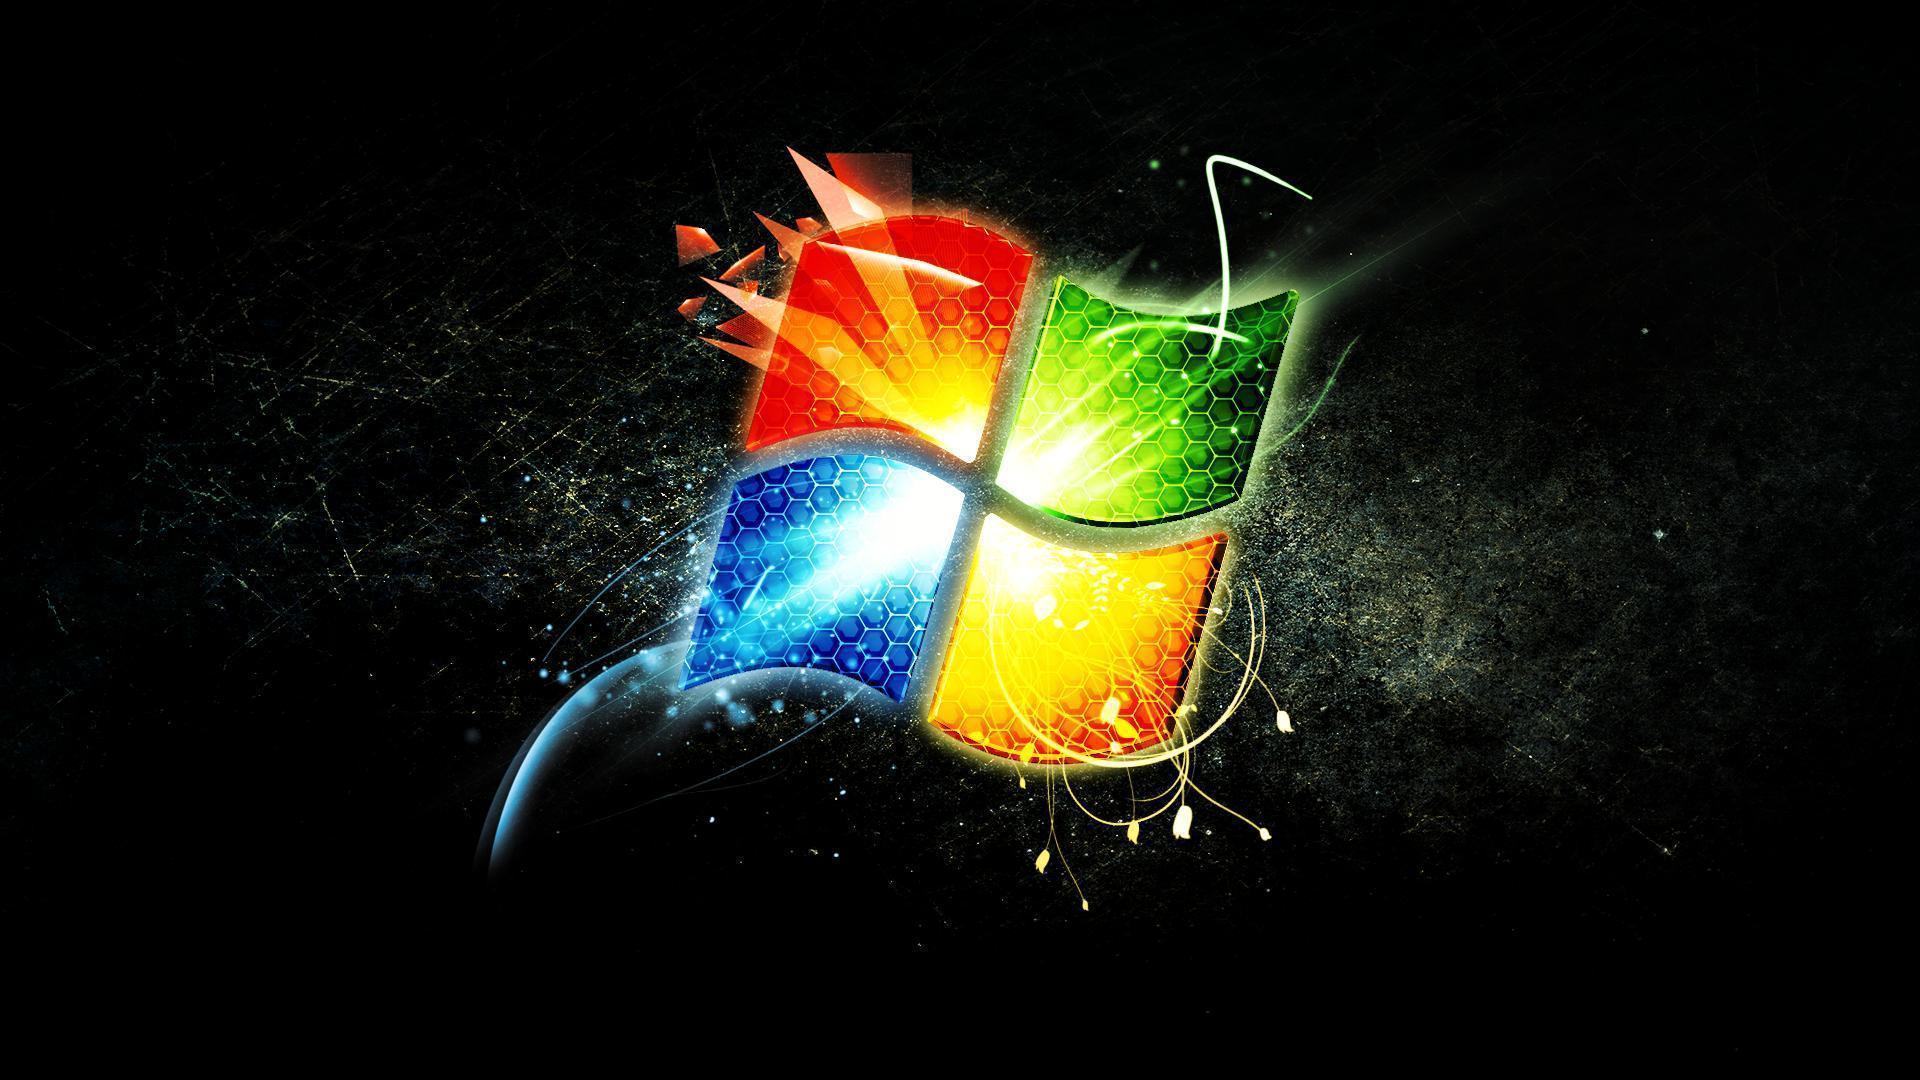 Moving Gif Wallpaper Windows 7 Image & Picture